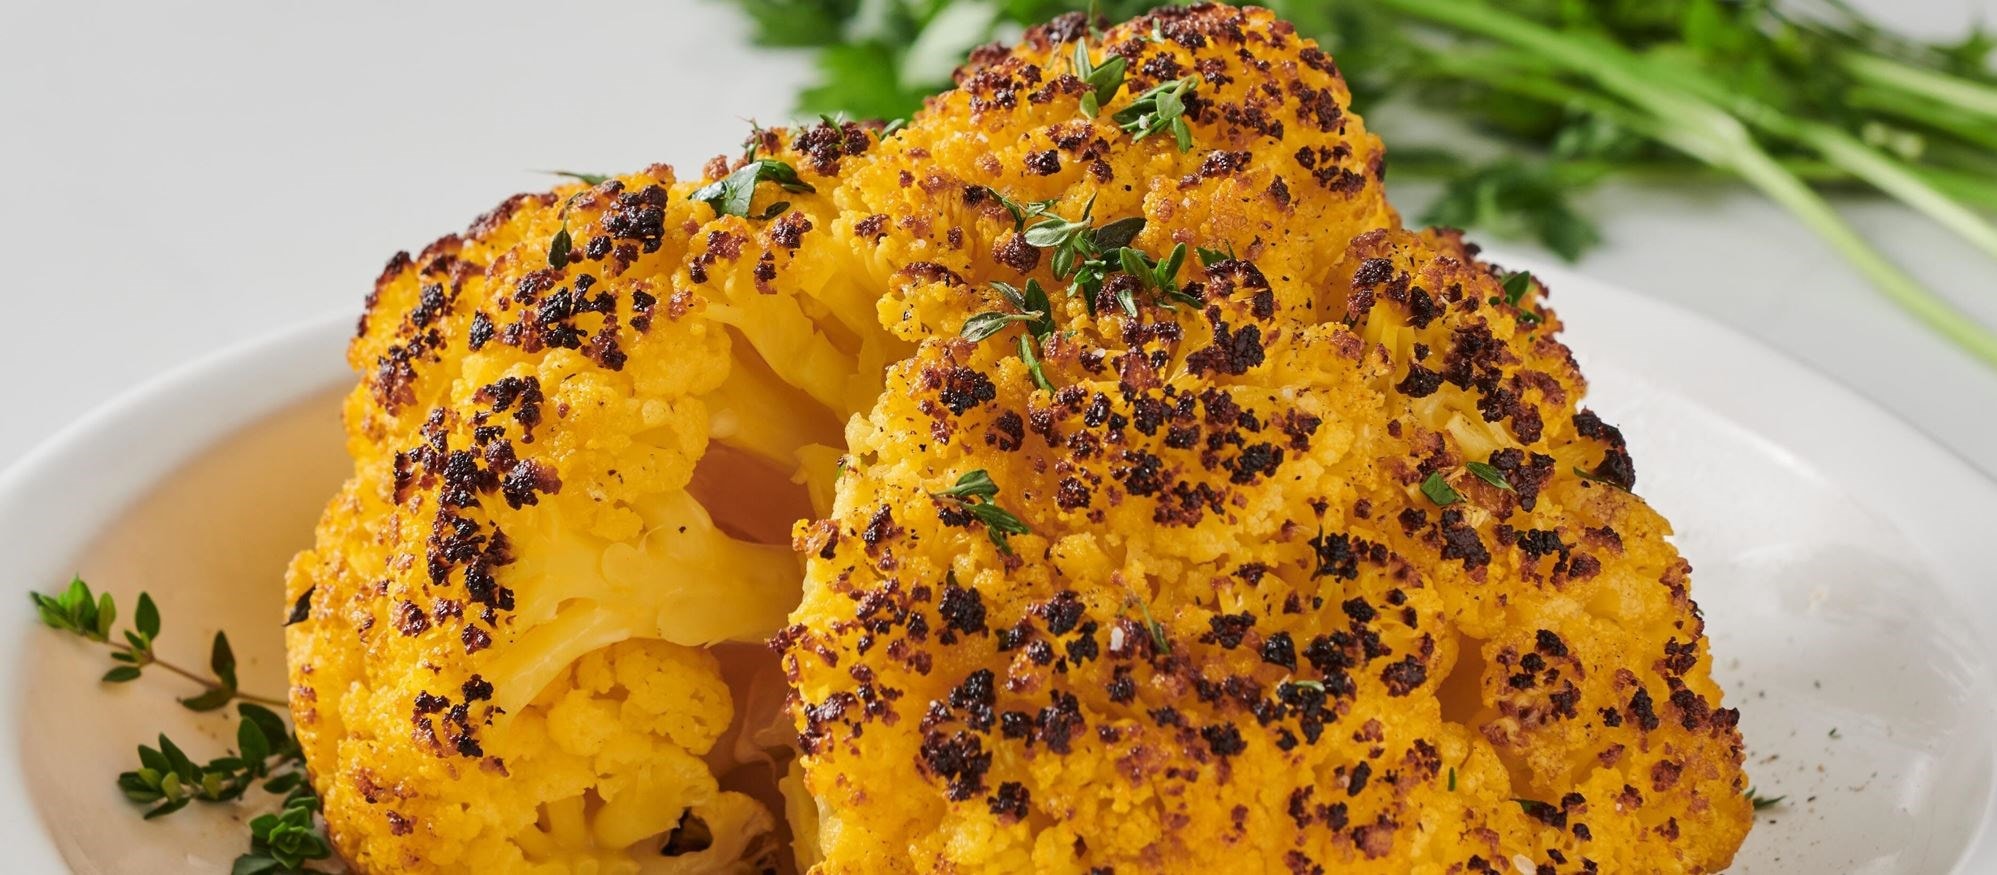 Easy and delicious Whole Roasted Cauliflower recipe using the Gourmet Mode setting of your Wolf Oven